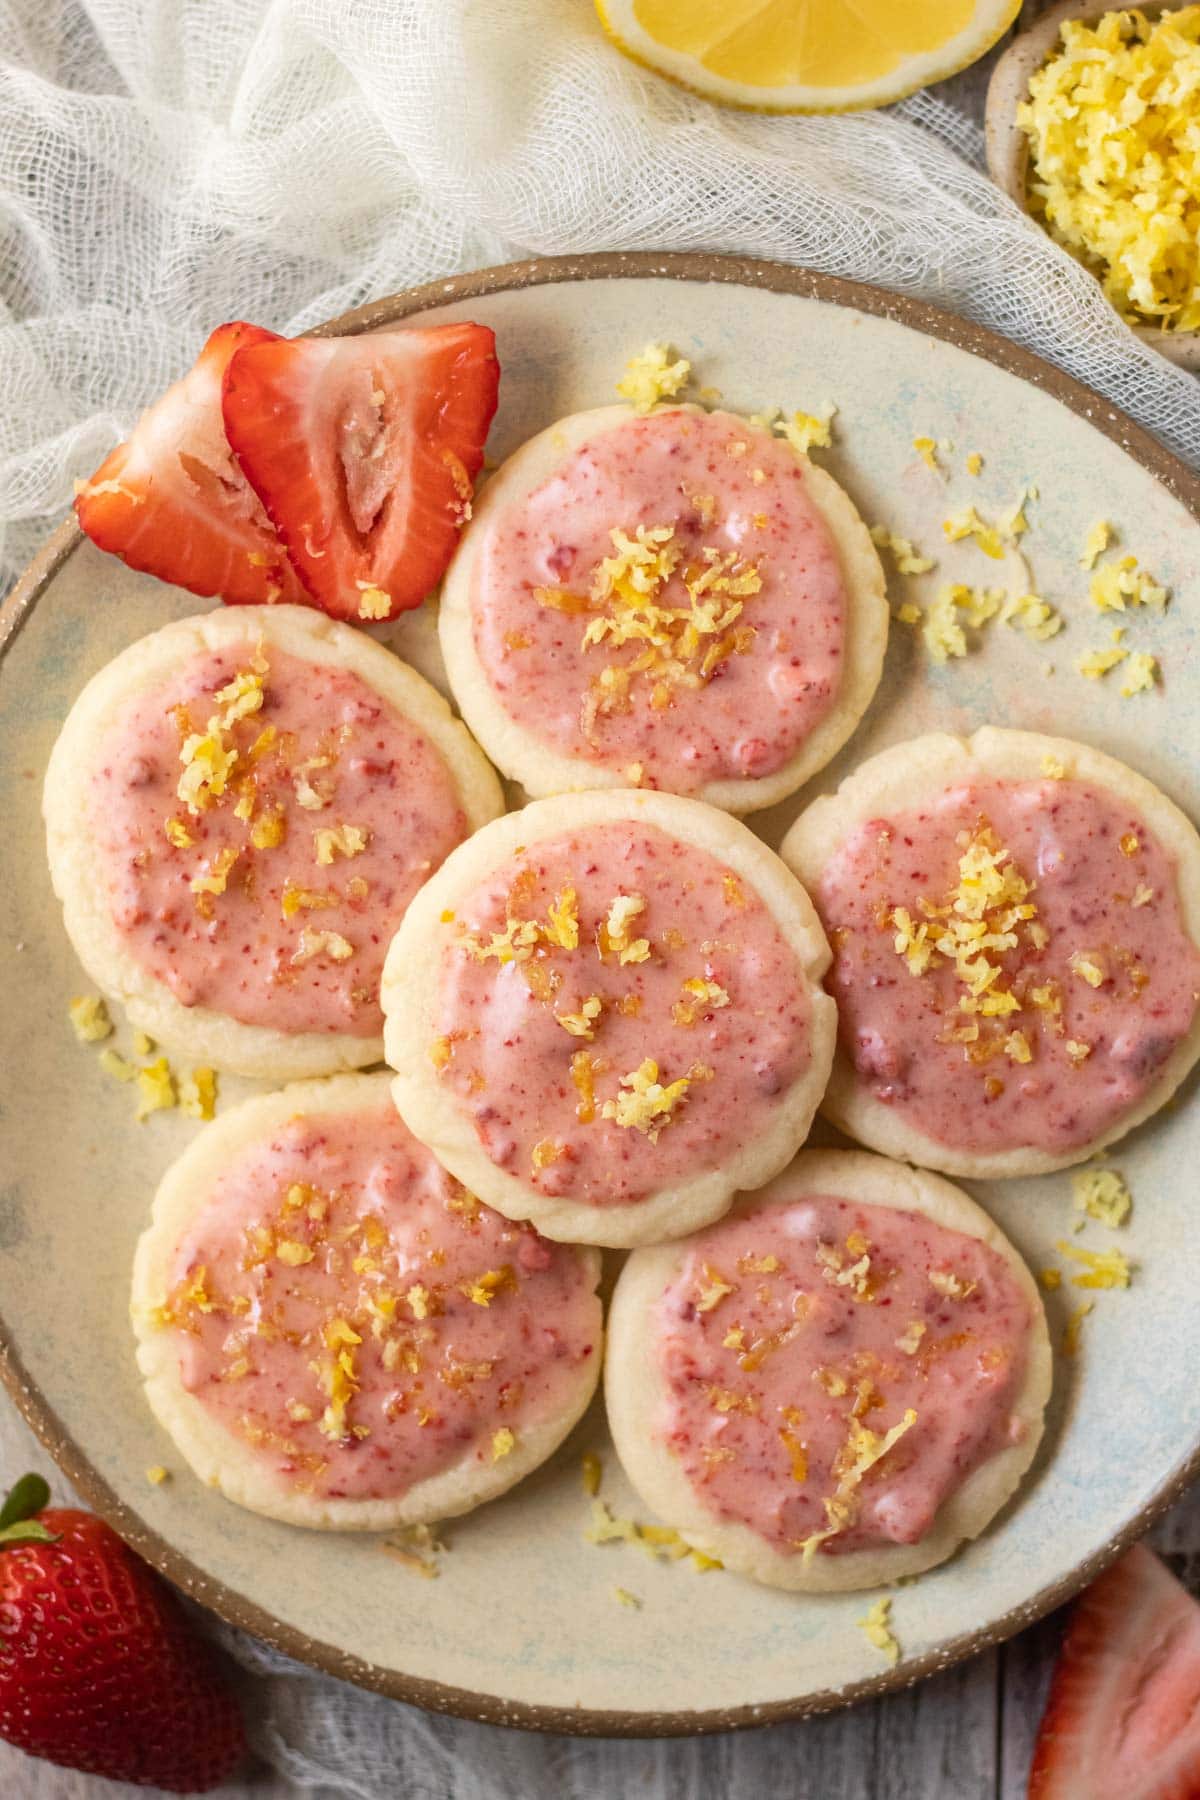 lemon shortbread cookies with strawberry glaze on a gray plate